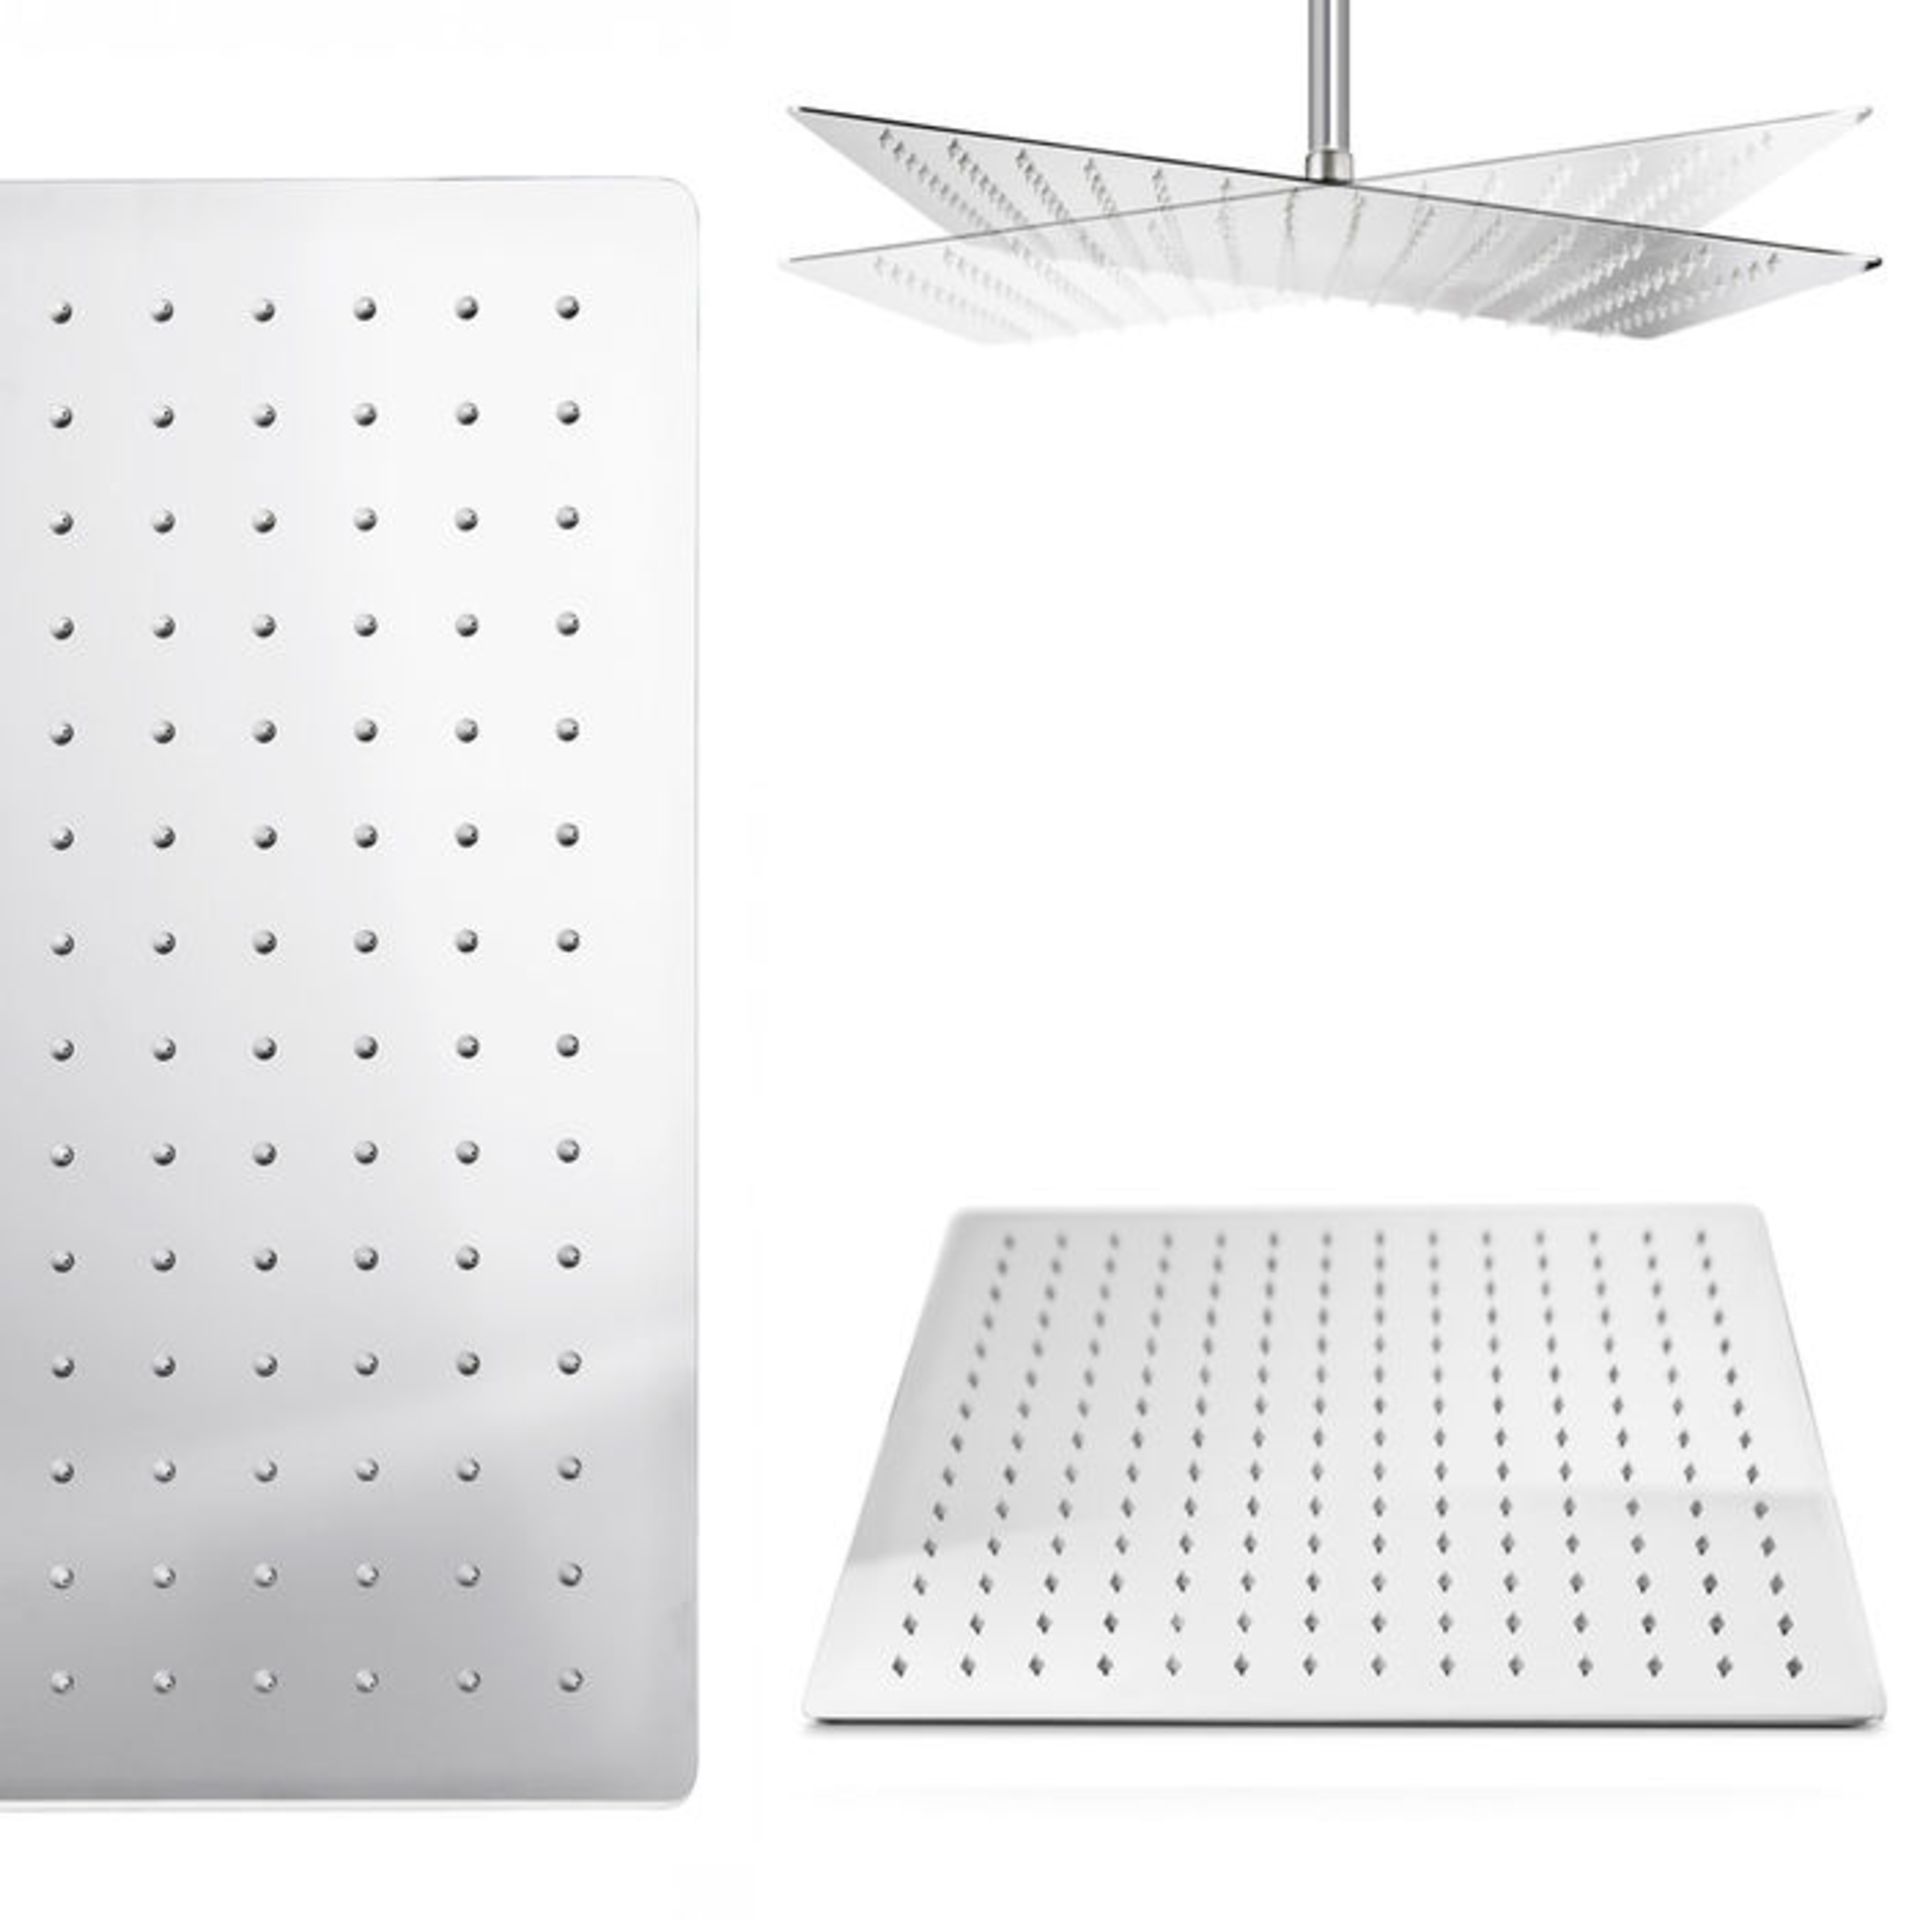 (AL273) Stainless Steel 400mm Large Square Shower Head Solid metal structure Can be wall or - Image 2 of 2